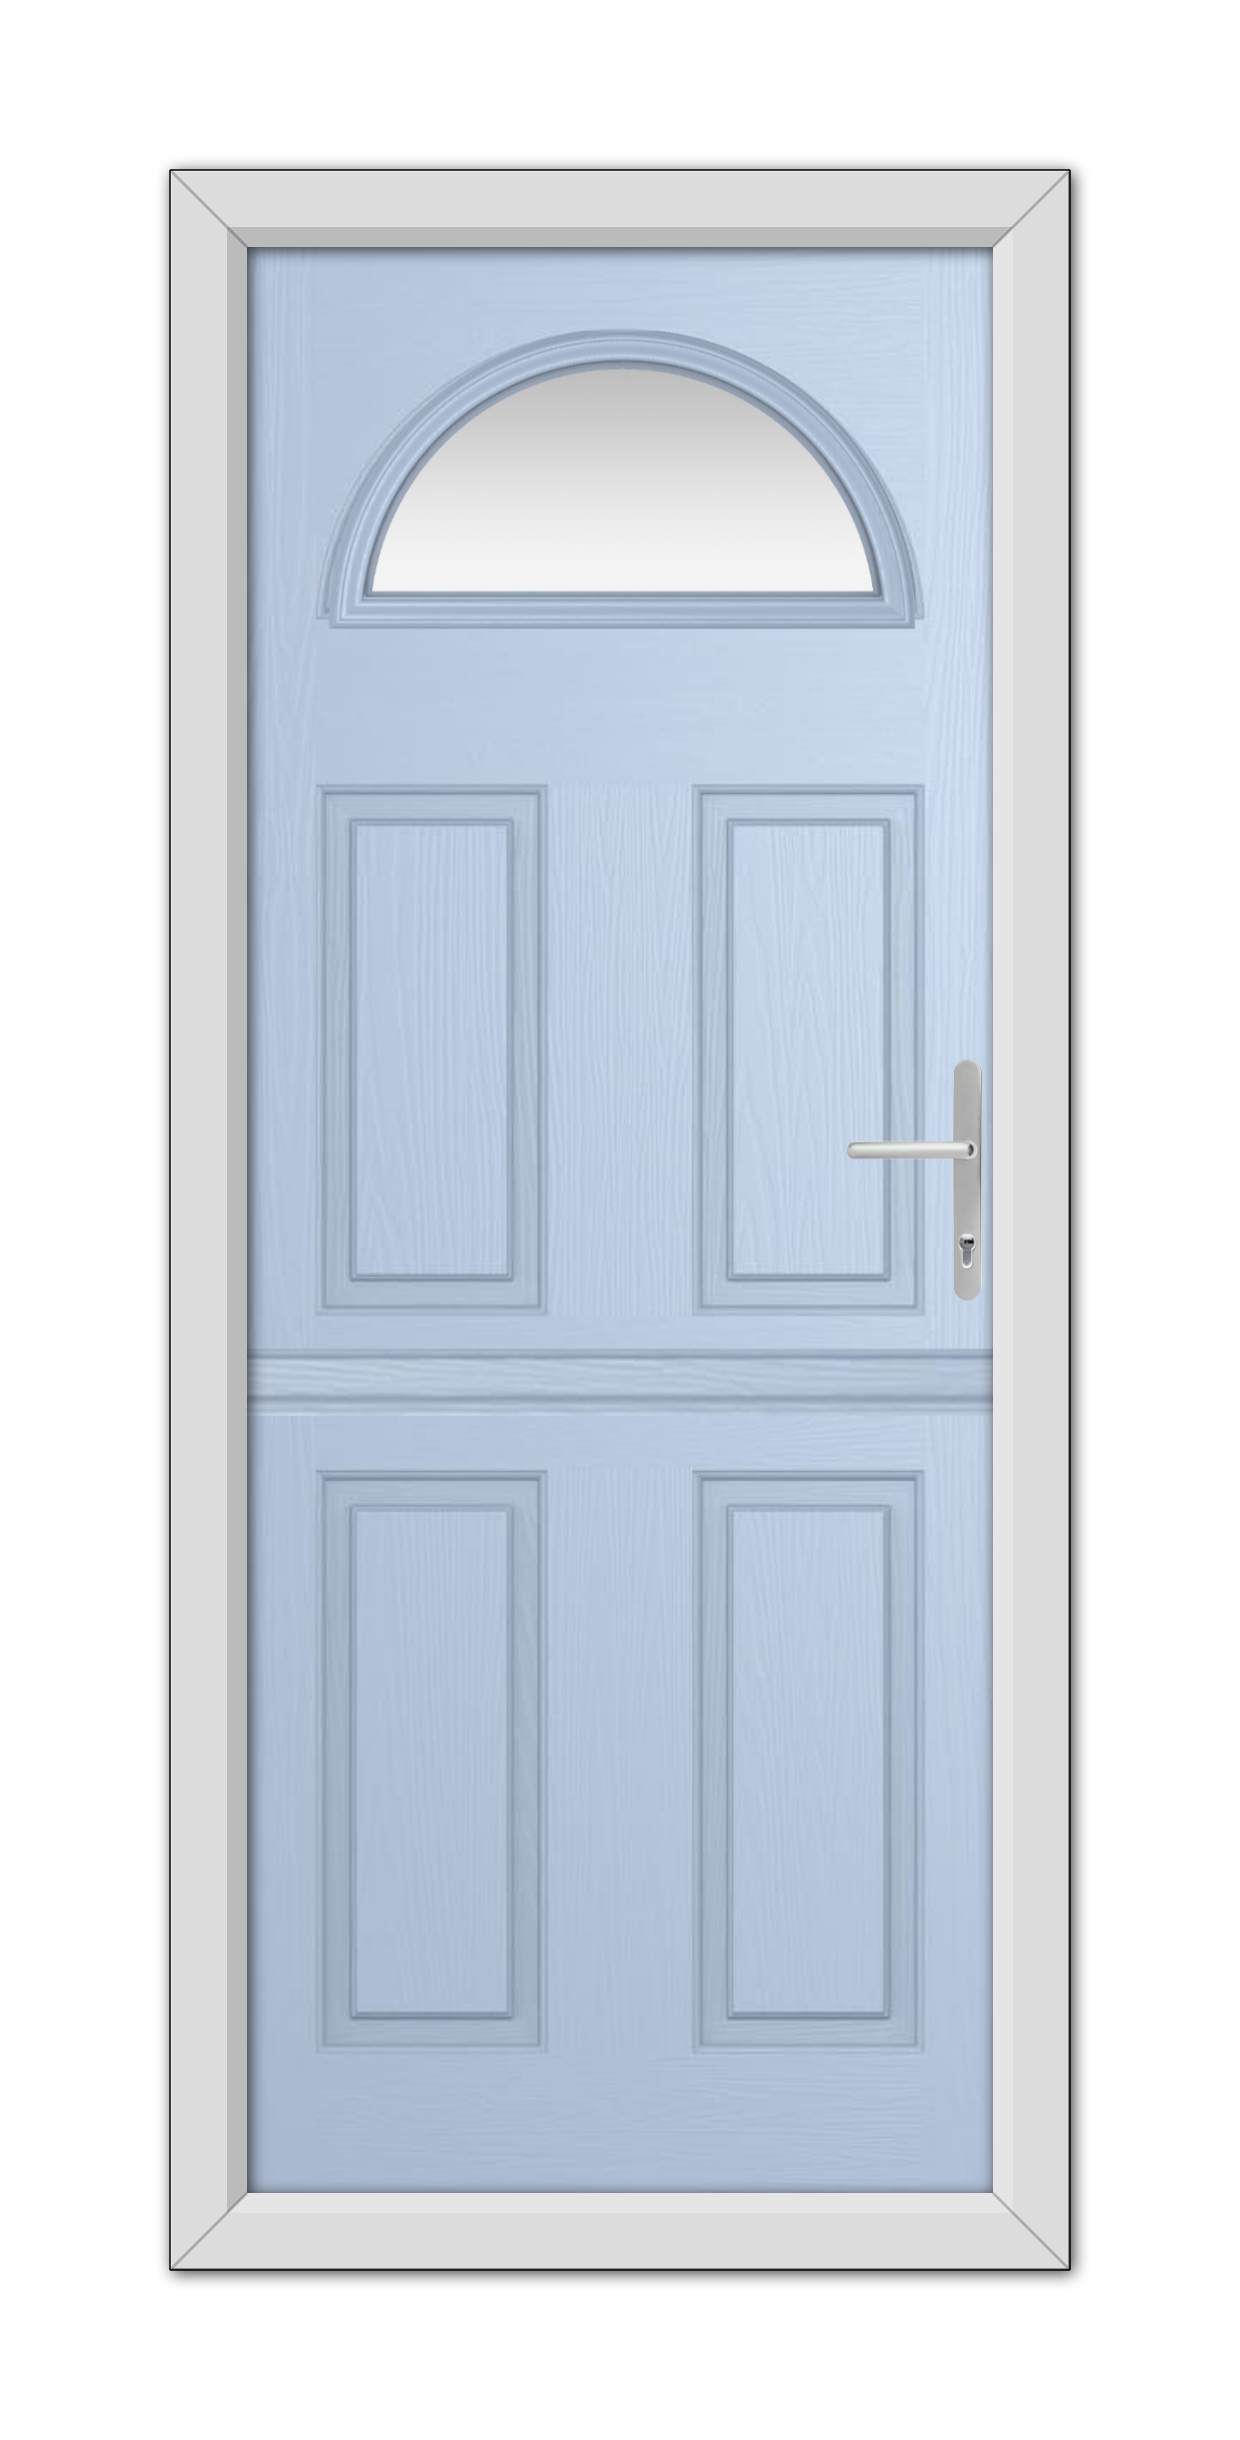 A closed Duck Egg Blue Winslow 1 Stable Composite door with six panels and a semi-circular window at the top, featuring a silver handle on the right side.